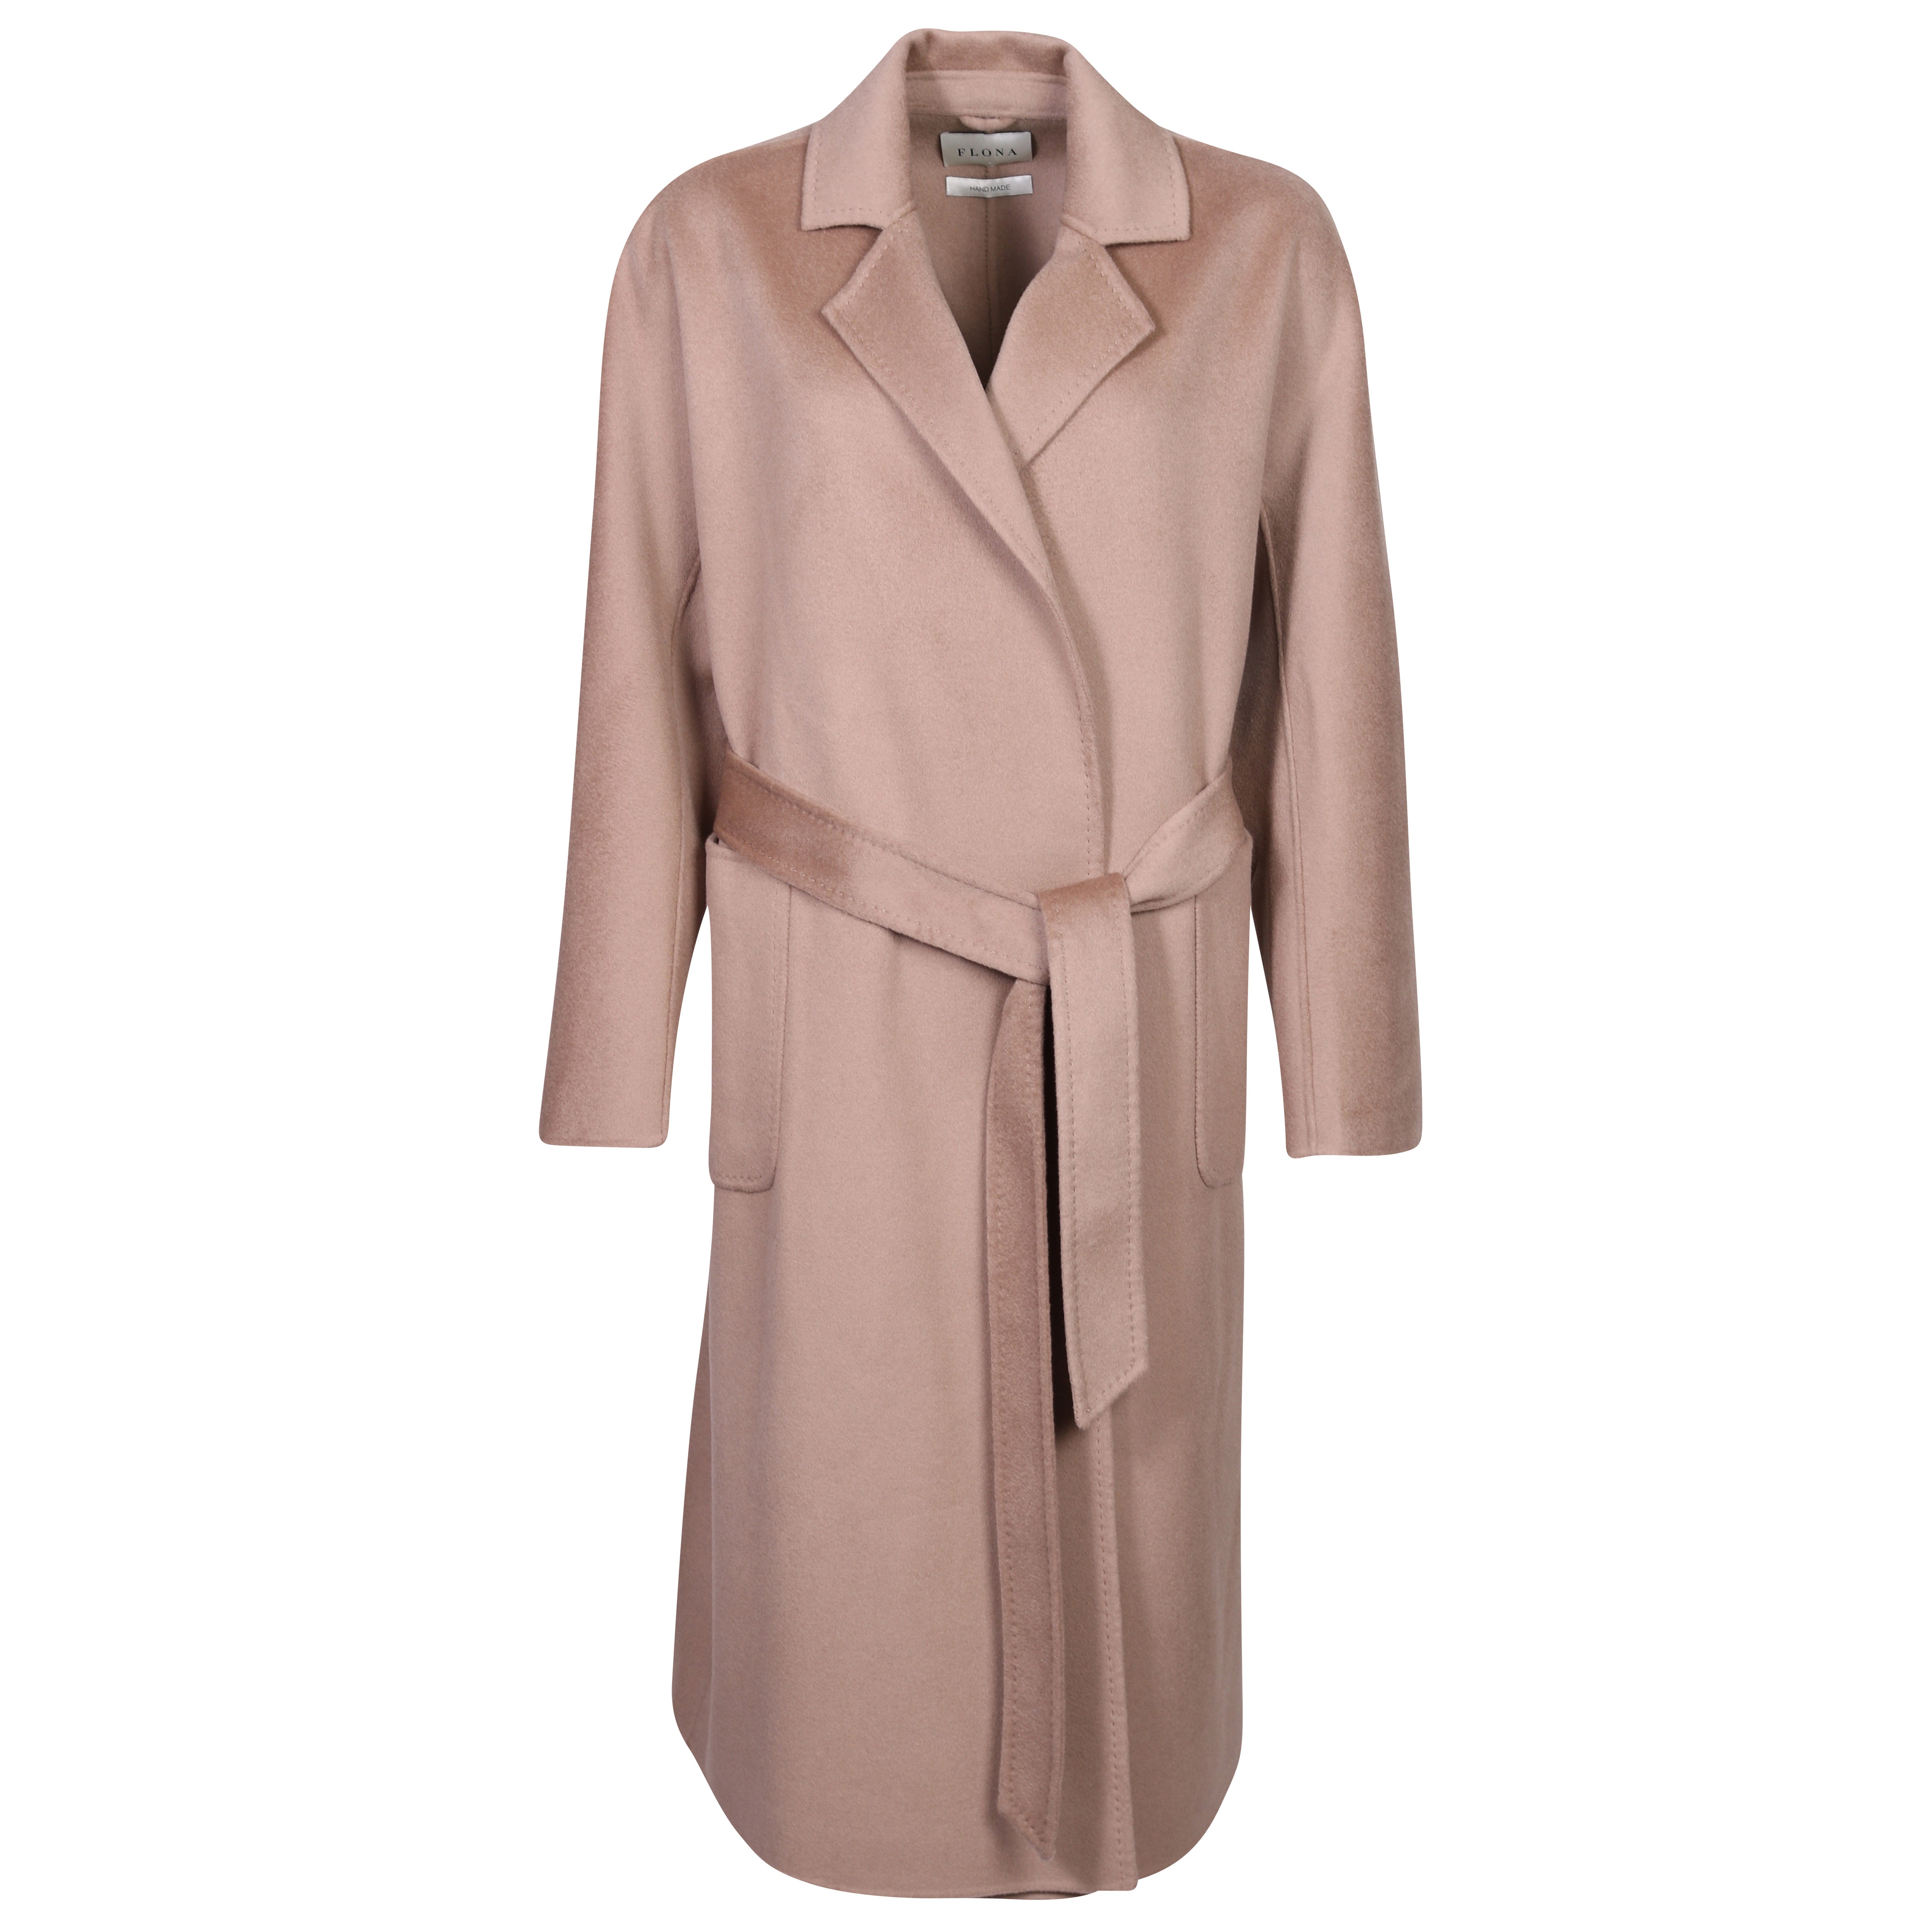 Flona Wool/Cashmere Coat in Taupe